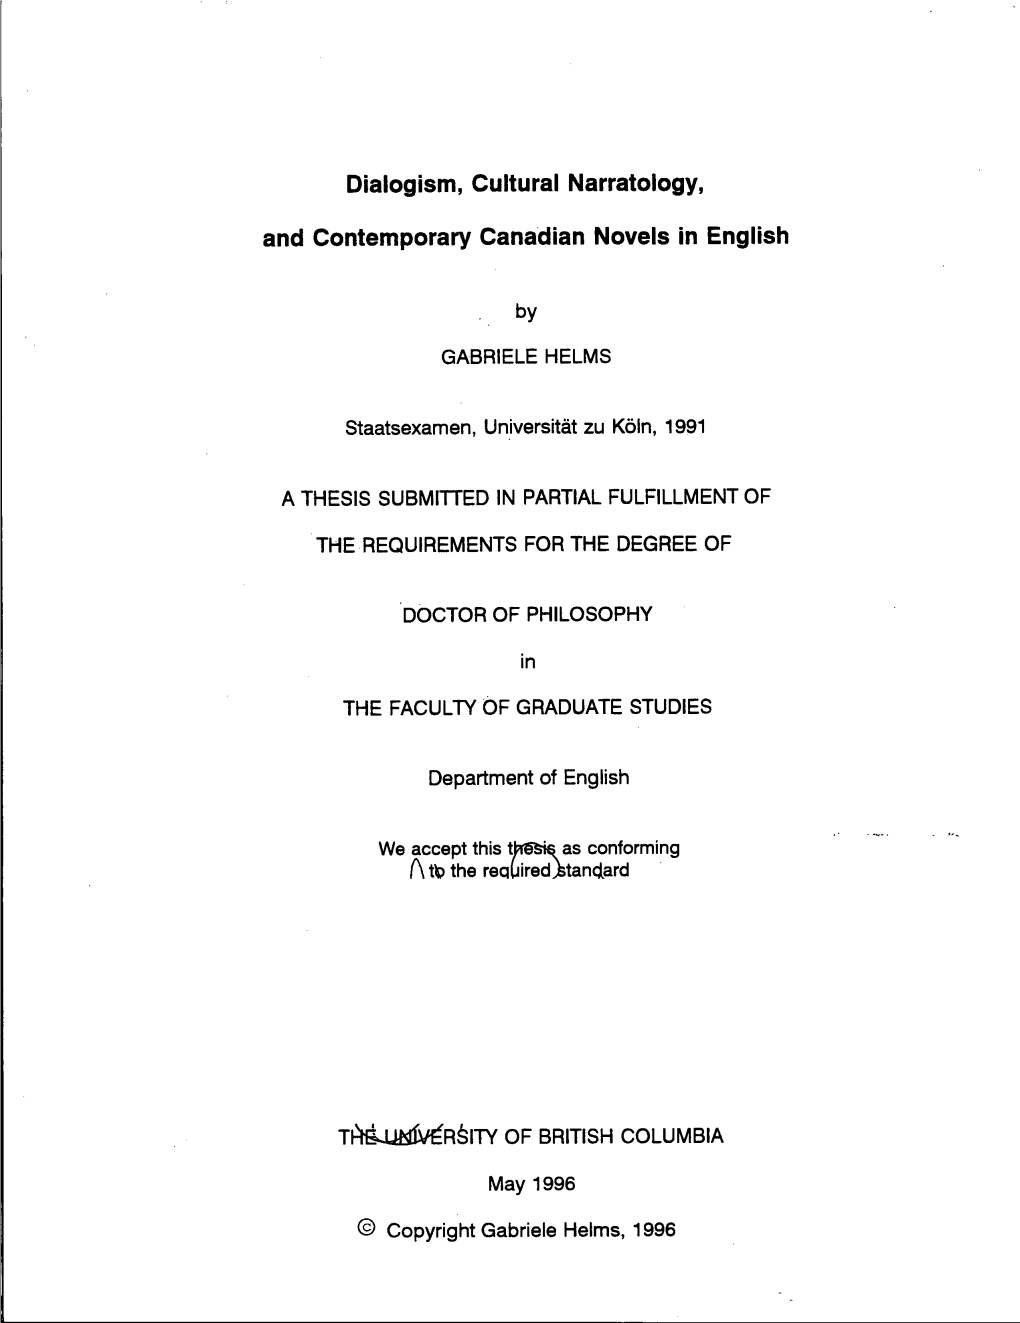 Dialogism, Cultural Narratology, and Contemporary Canadian Novels in English